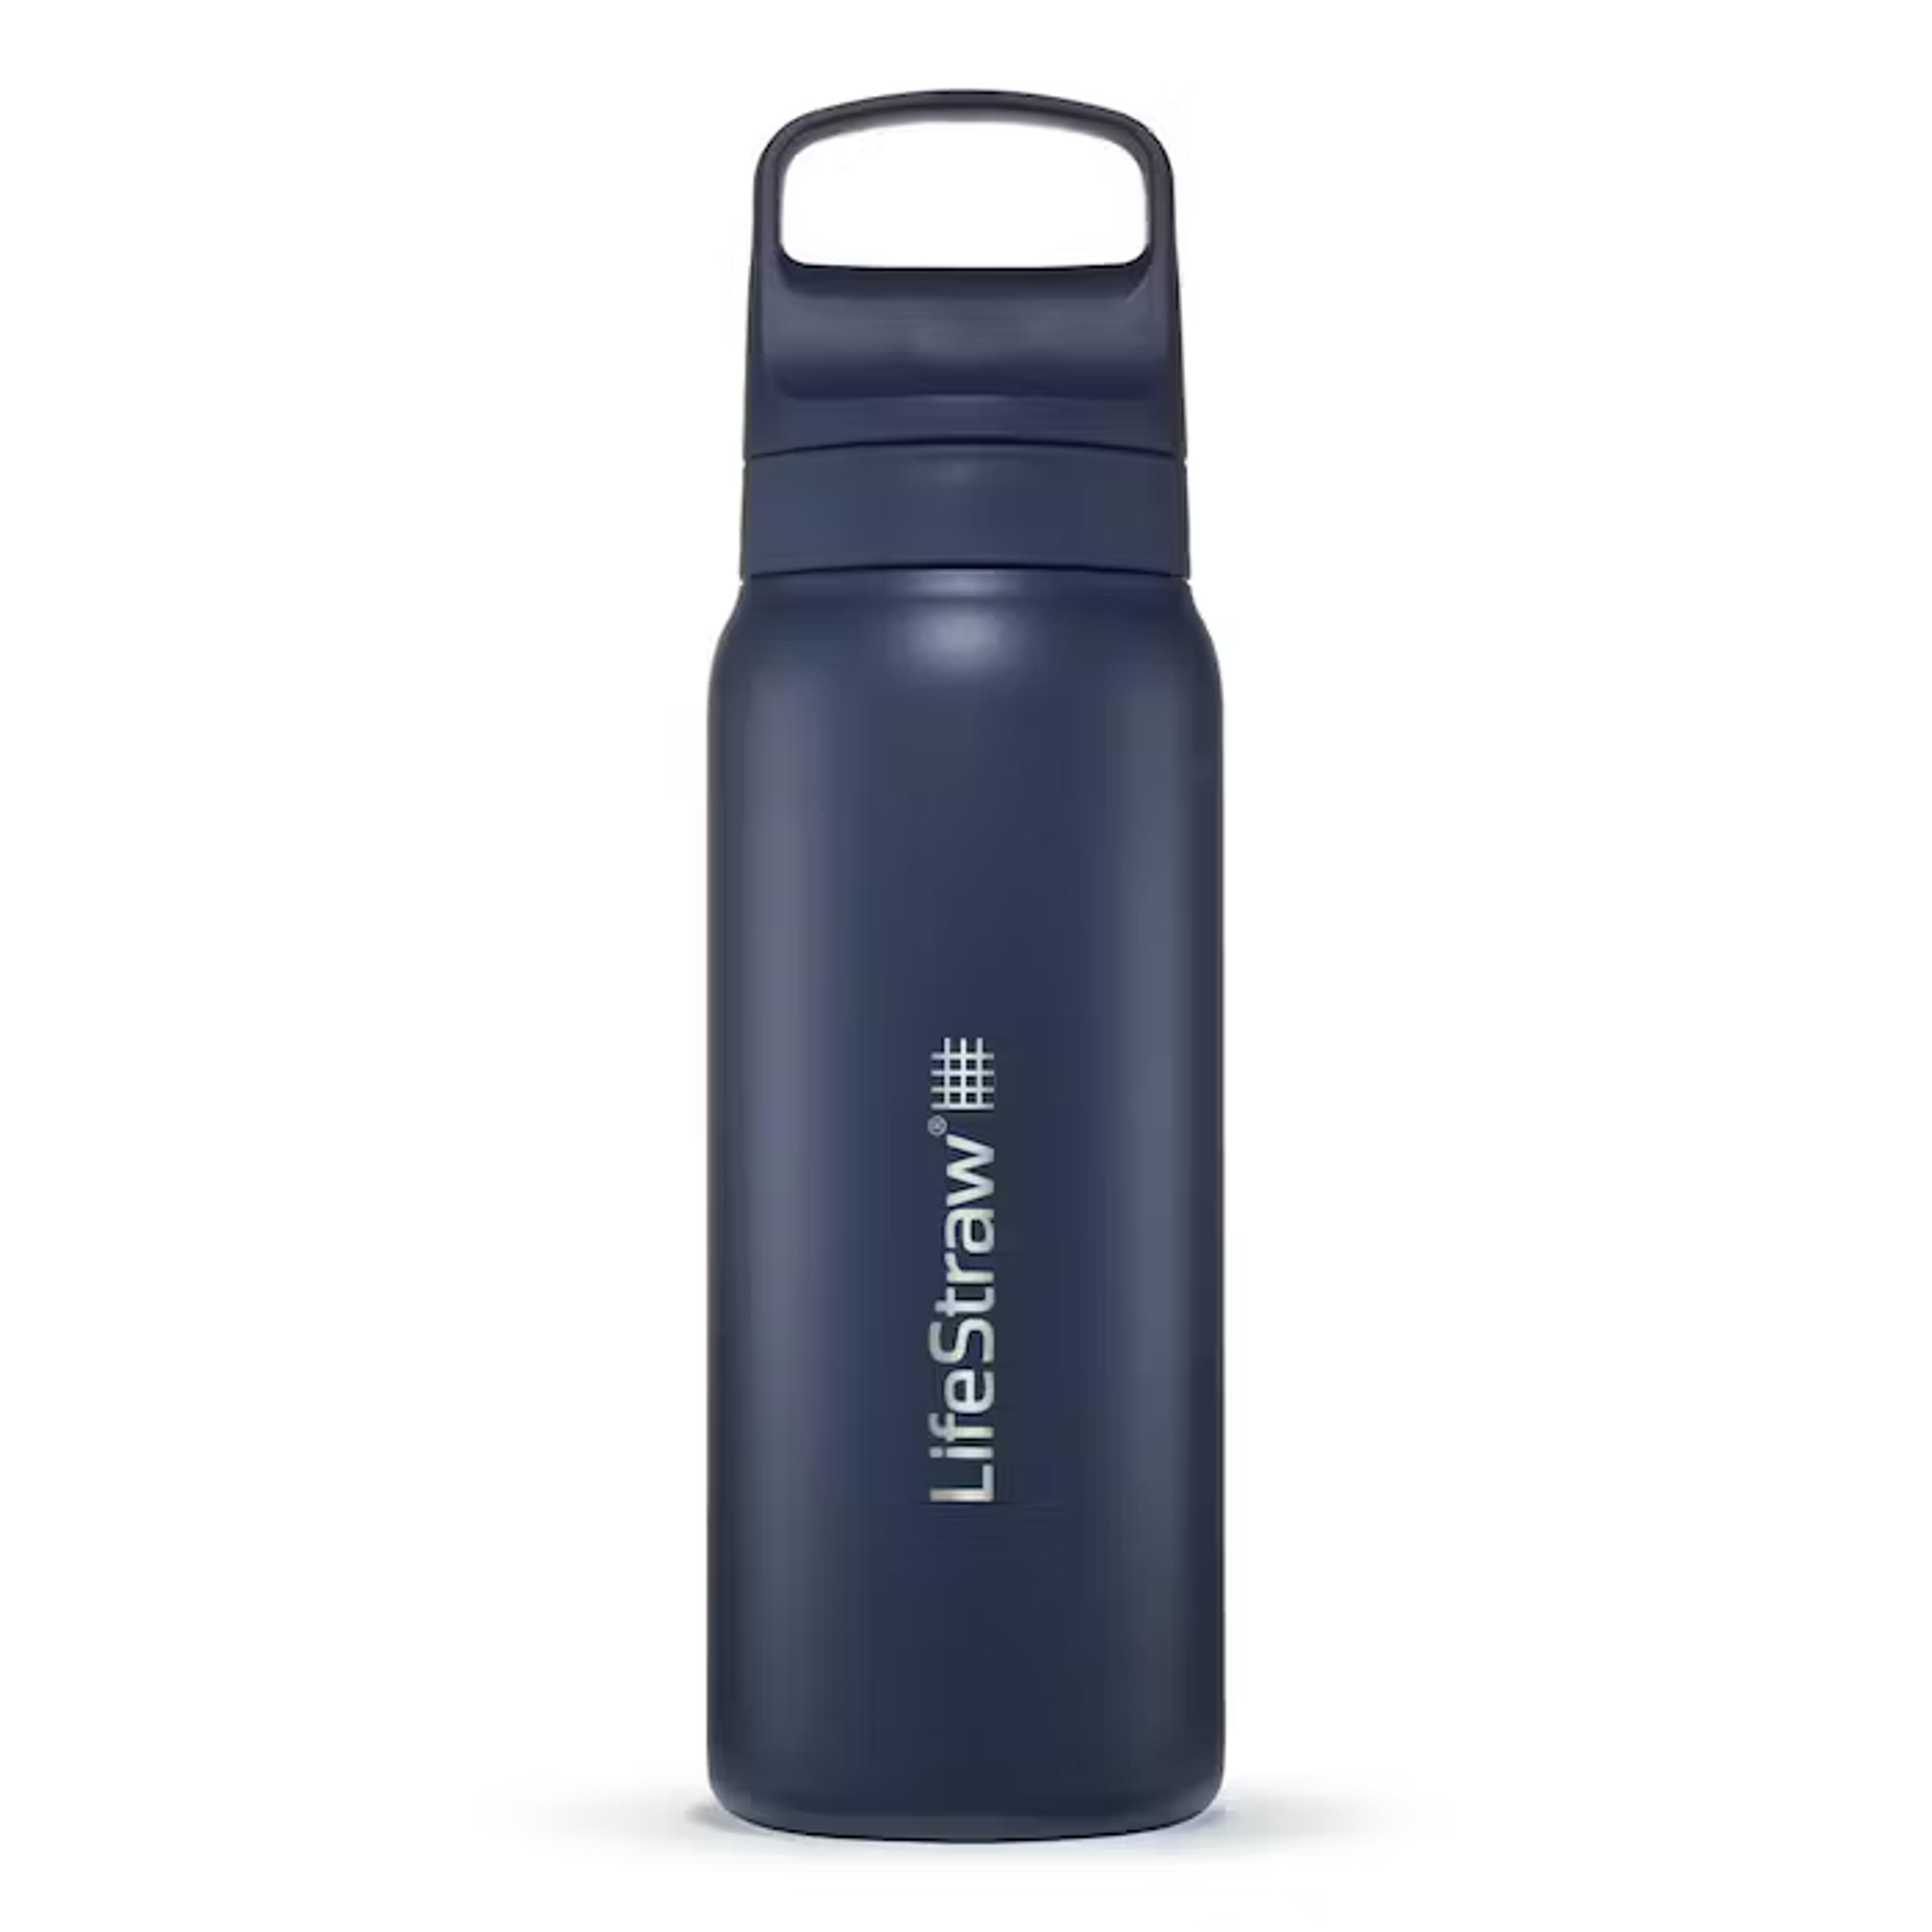 Go Stainless Steel Filtered Water Bottle - 24oz